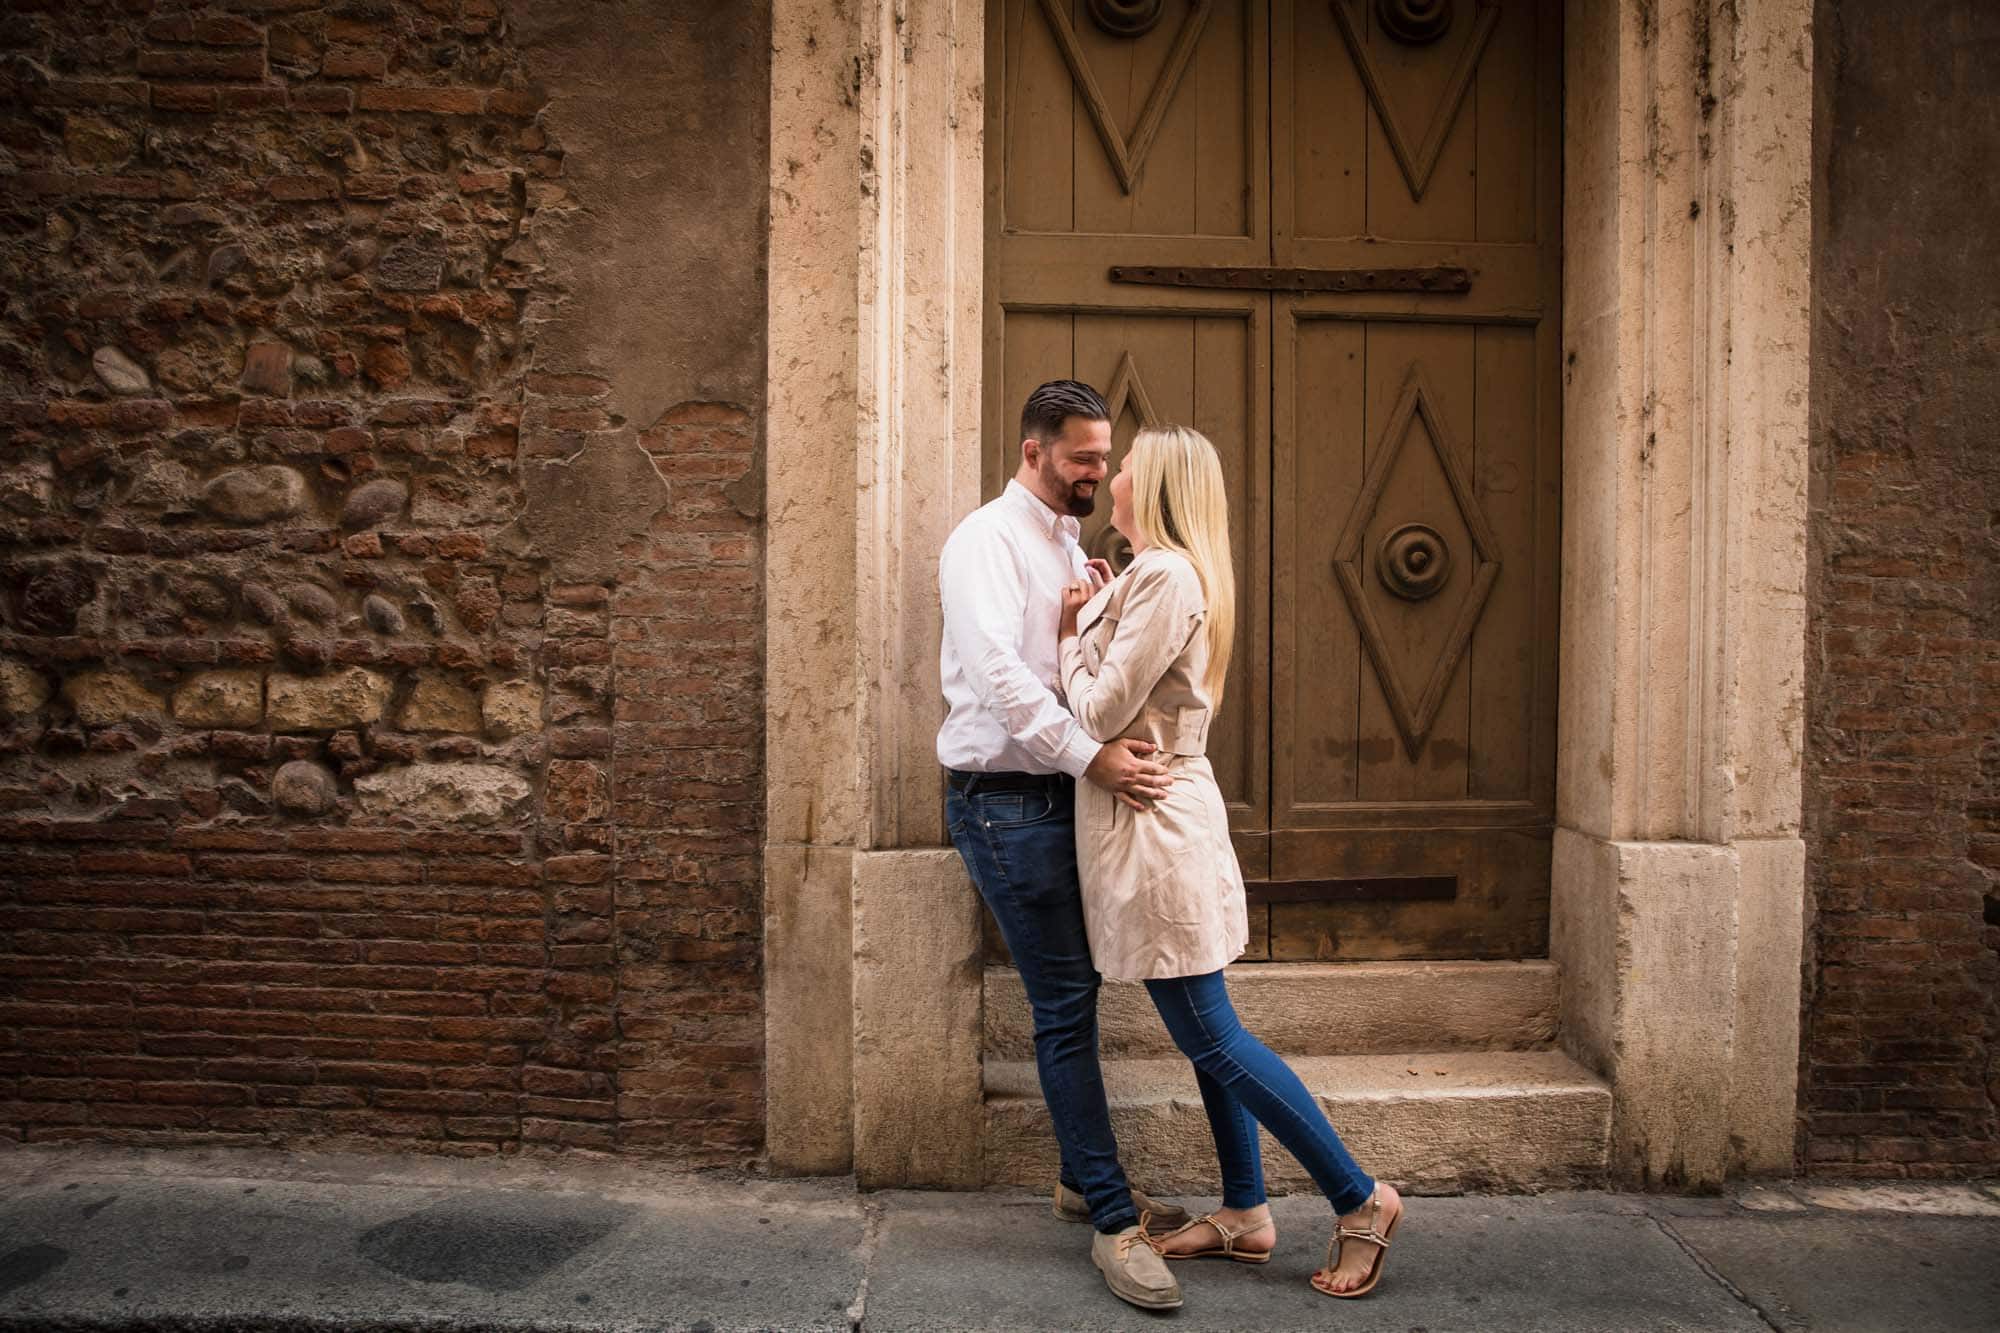 A romantic couple hug one another in Verona, Italy